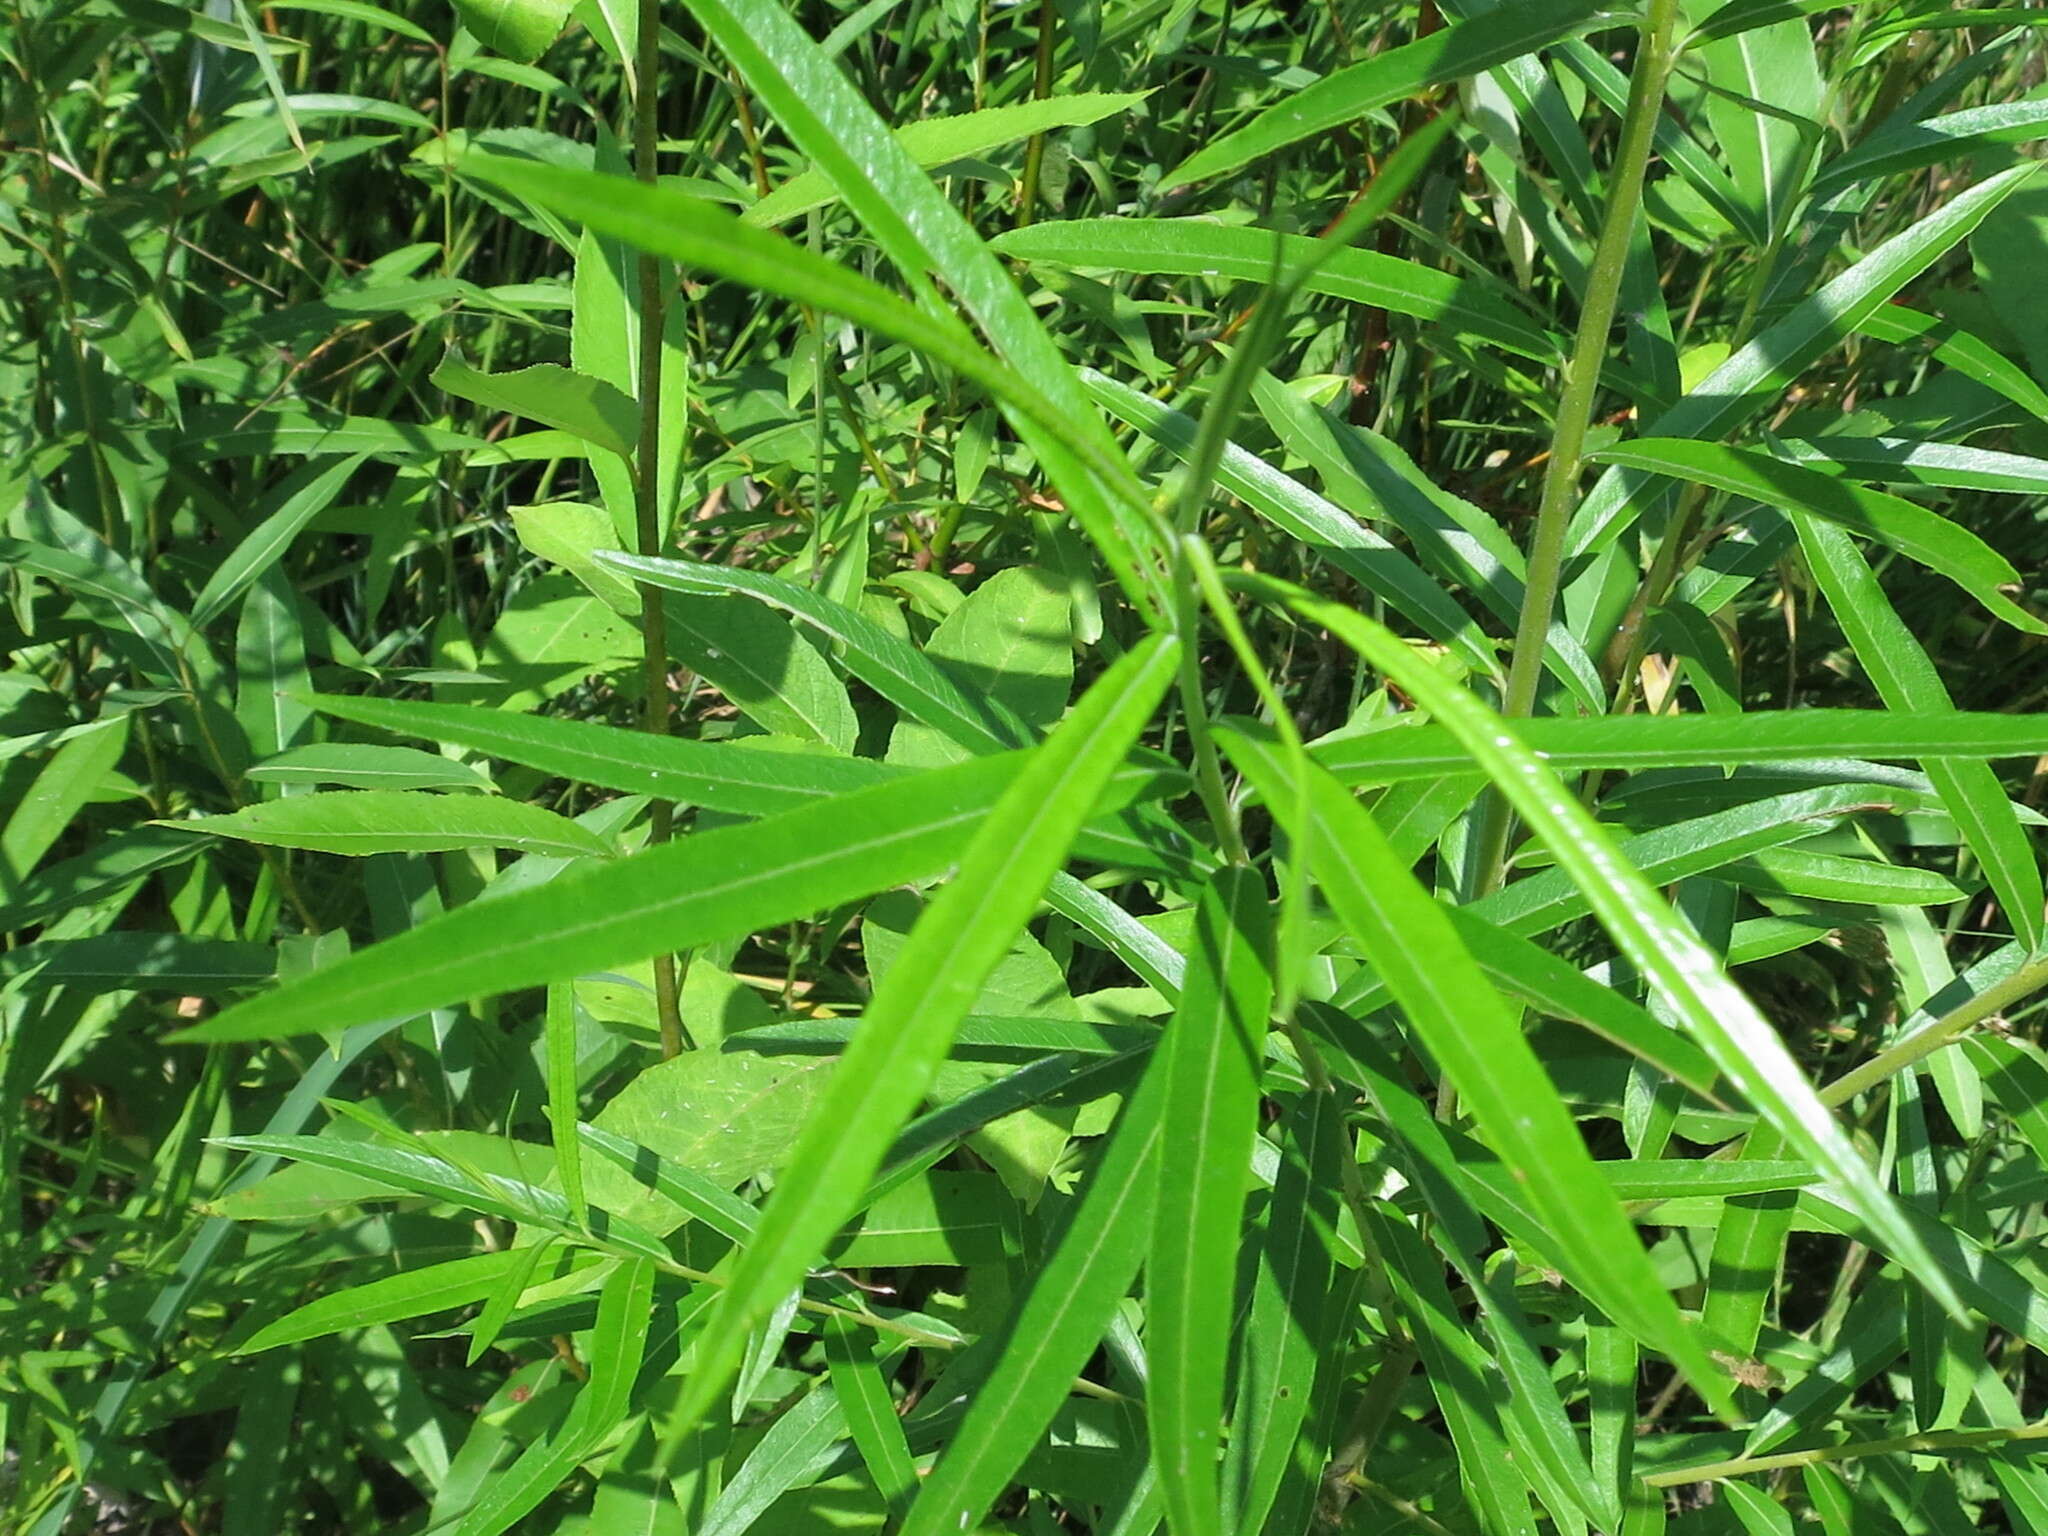 Image of narrow-leaf willow